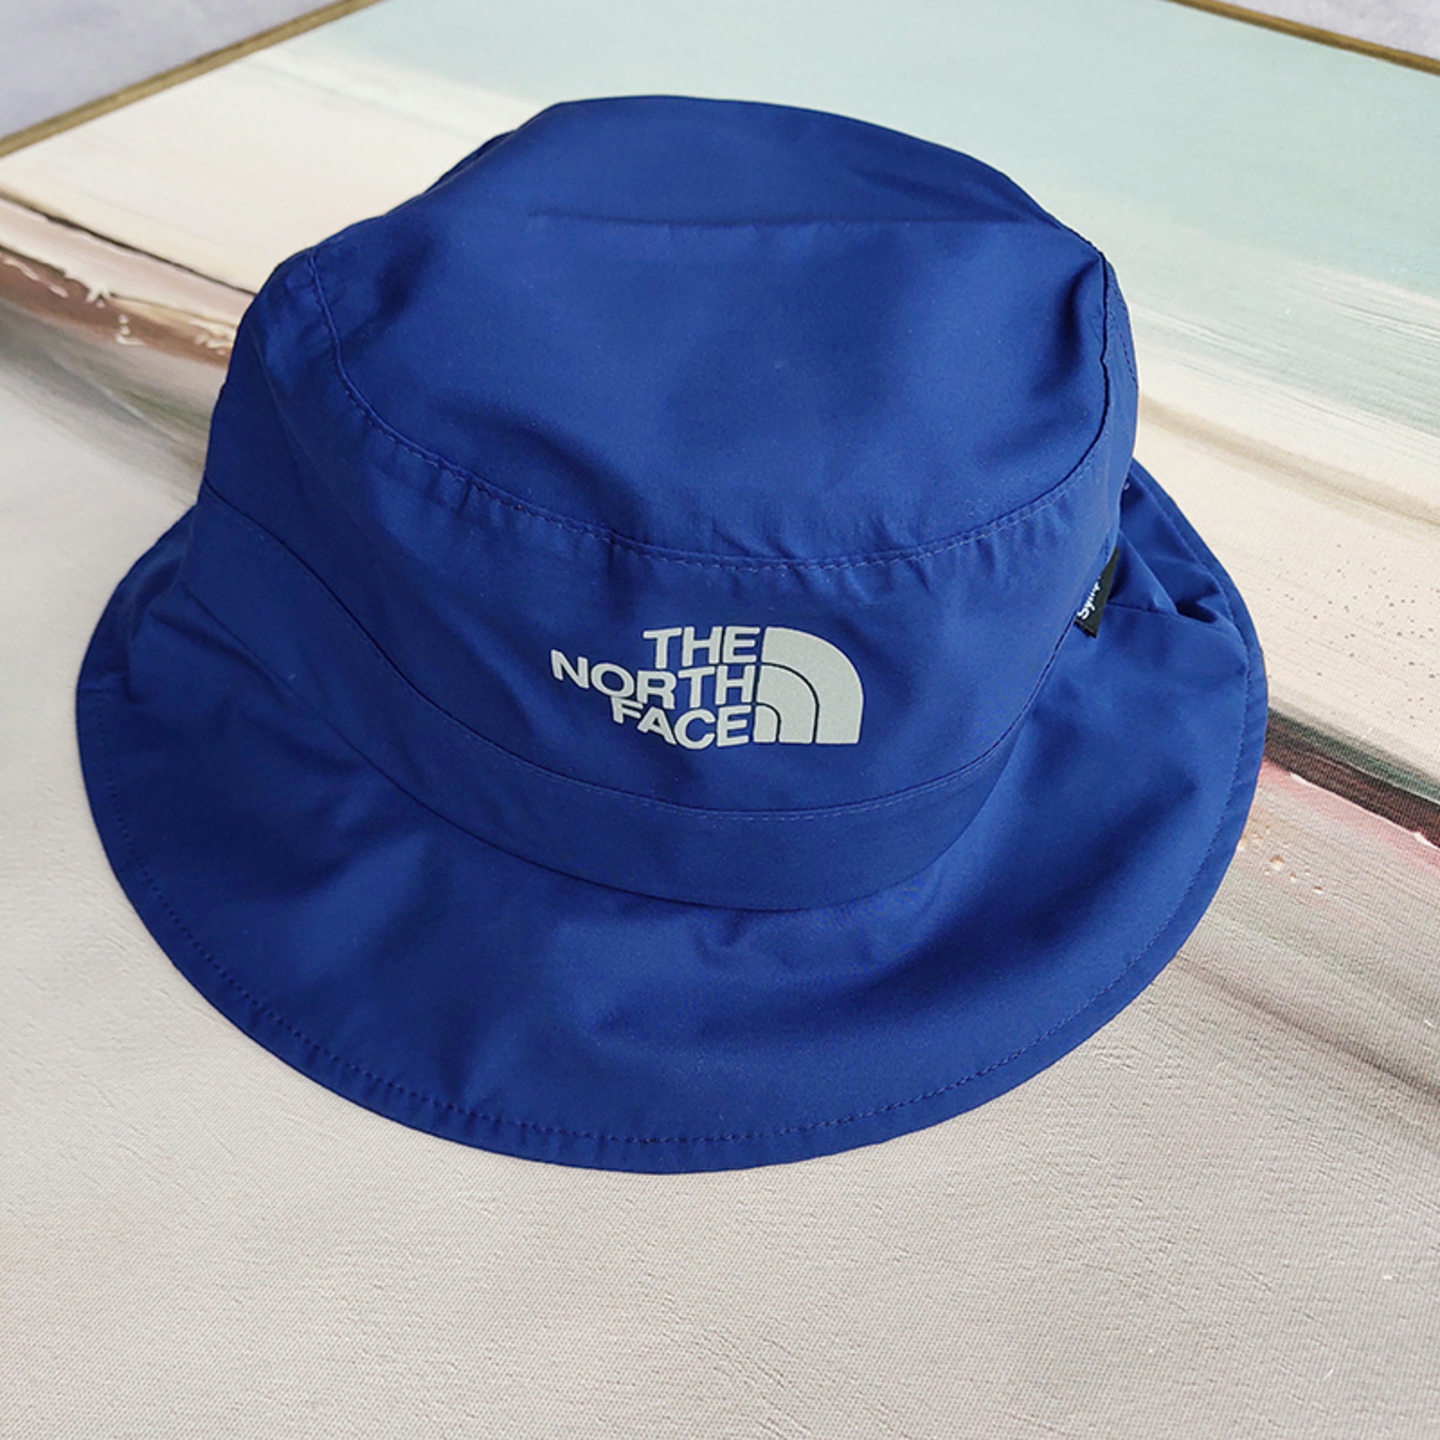 The North Face logo Hat